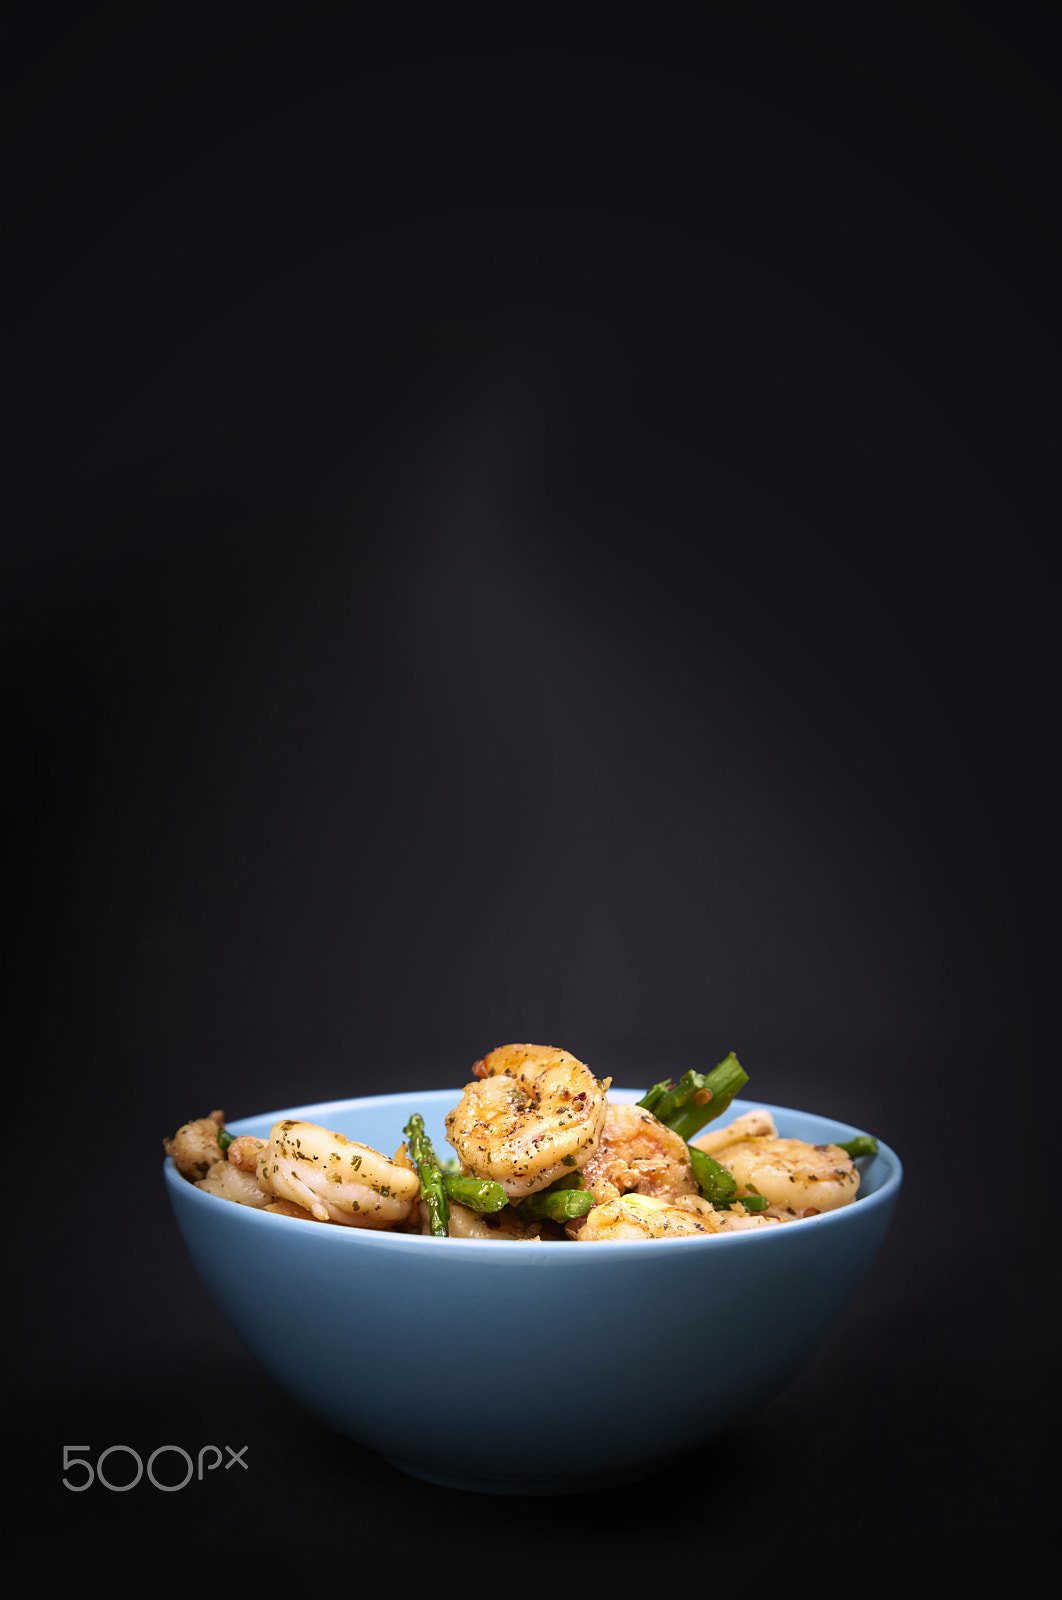 Sony a7R sample photo. Fried shrimps and asparagus in a bowl photography